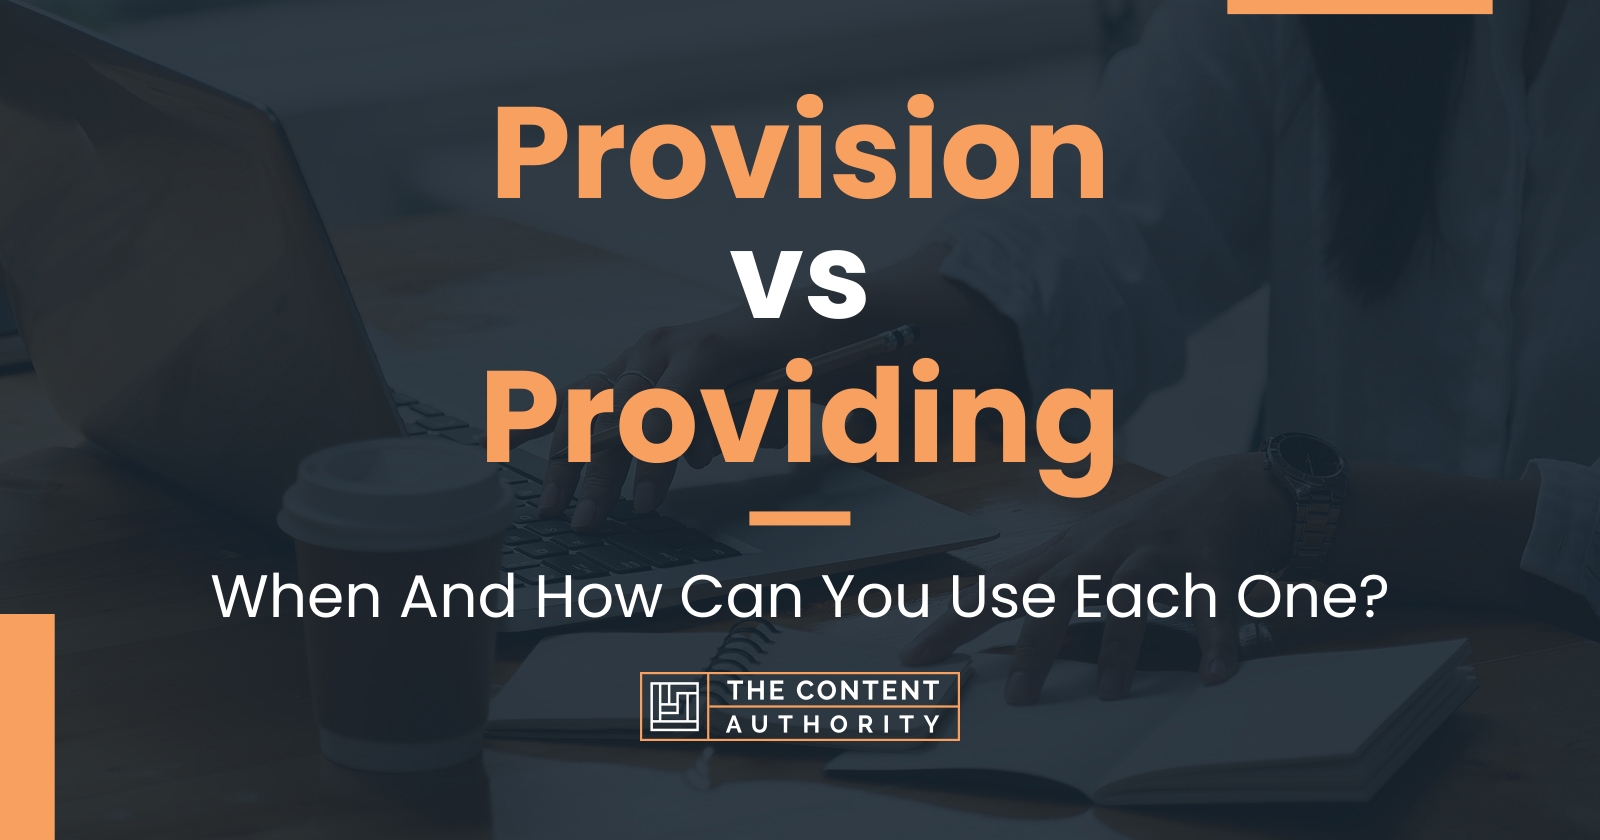 Provision vs Providing: When And How Can You Use Each One?